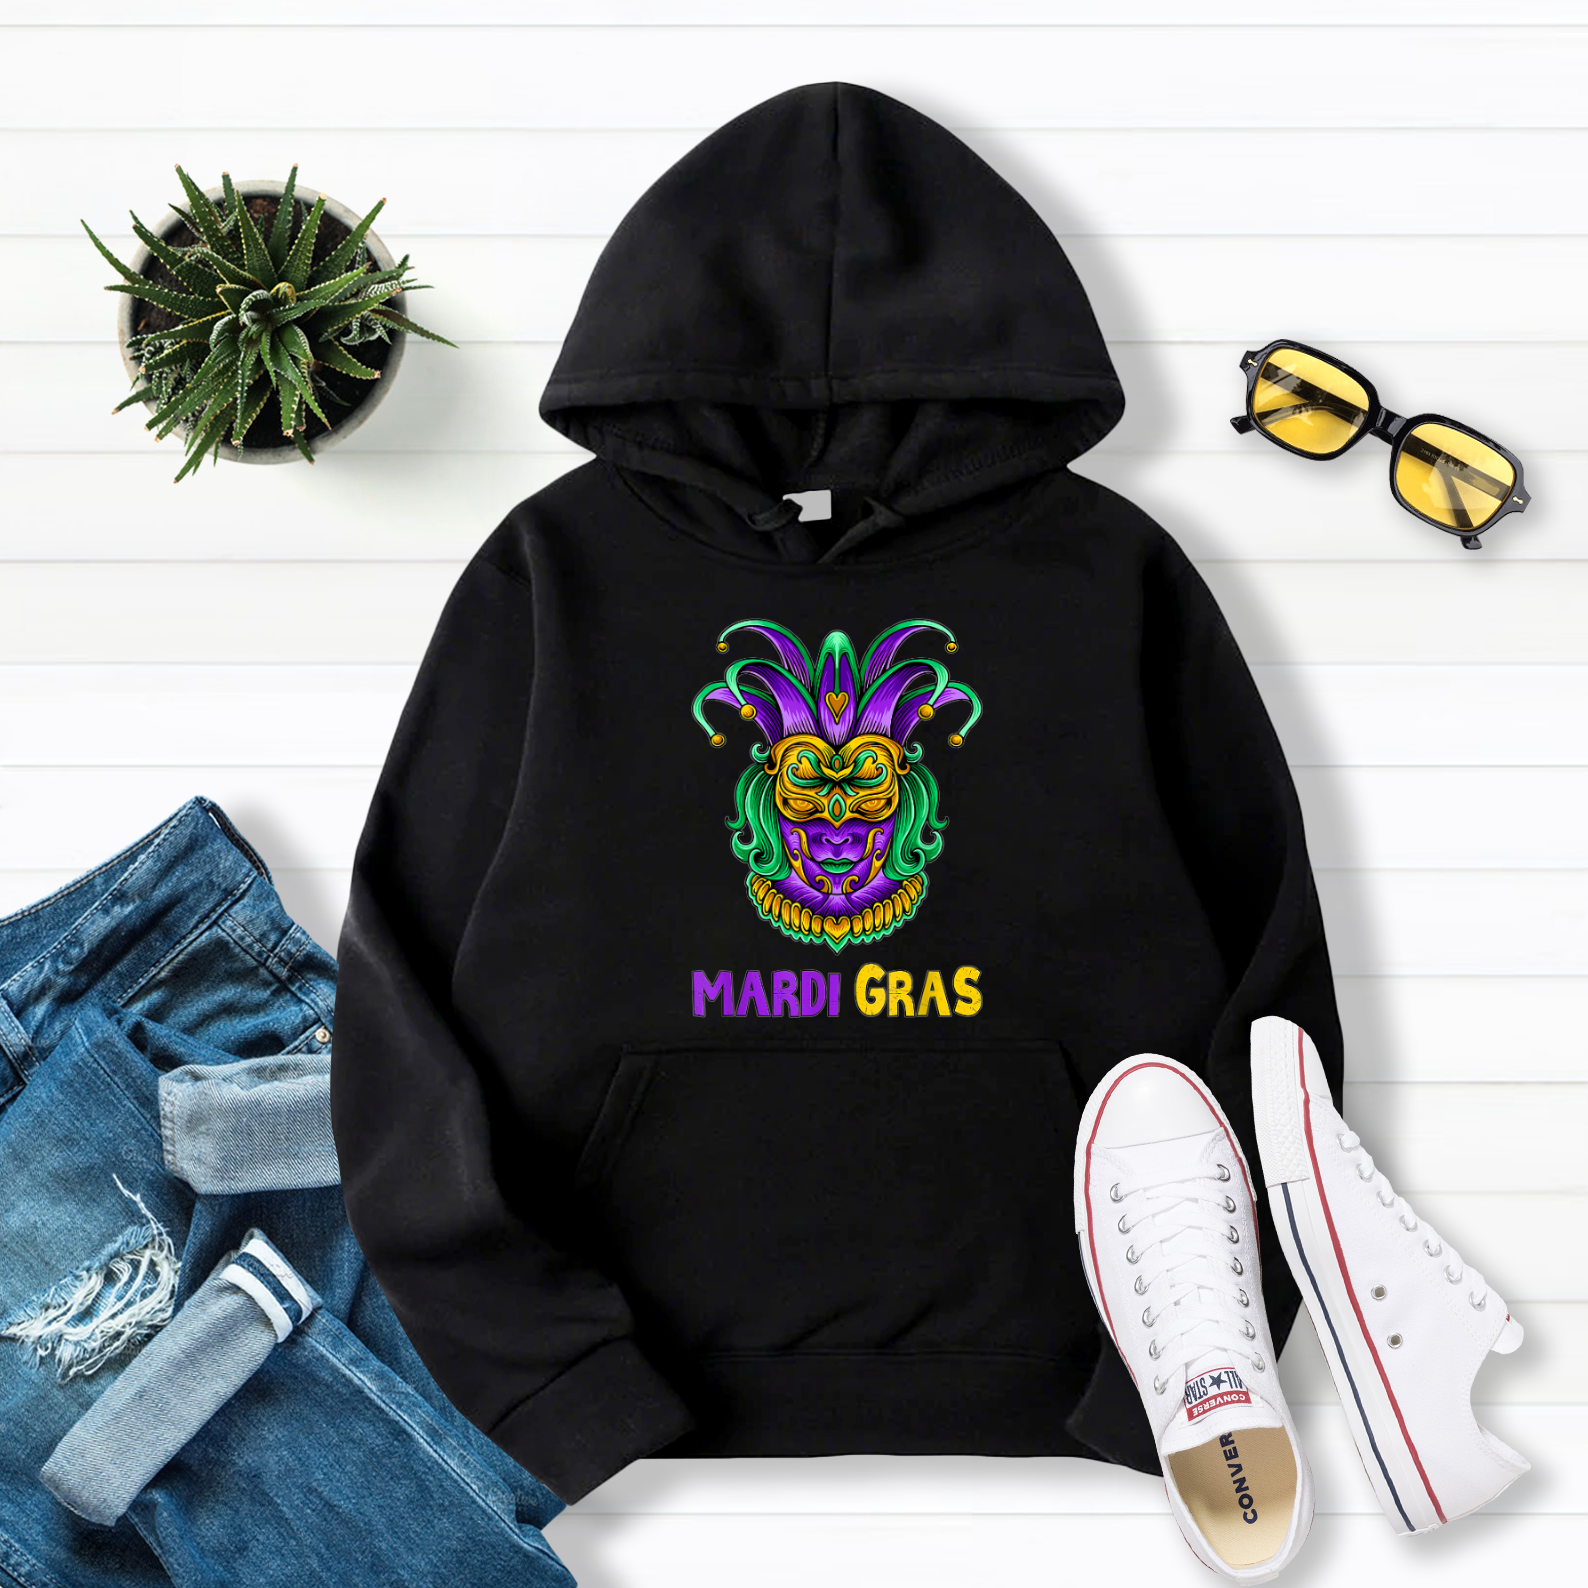 Mardi Gras Fat Tuesday Festival With Jester Hat Pullover Hoodie Black S-5XL